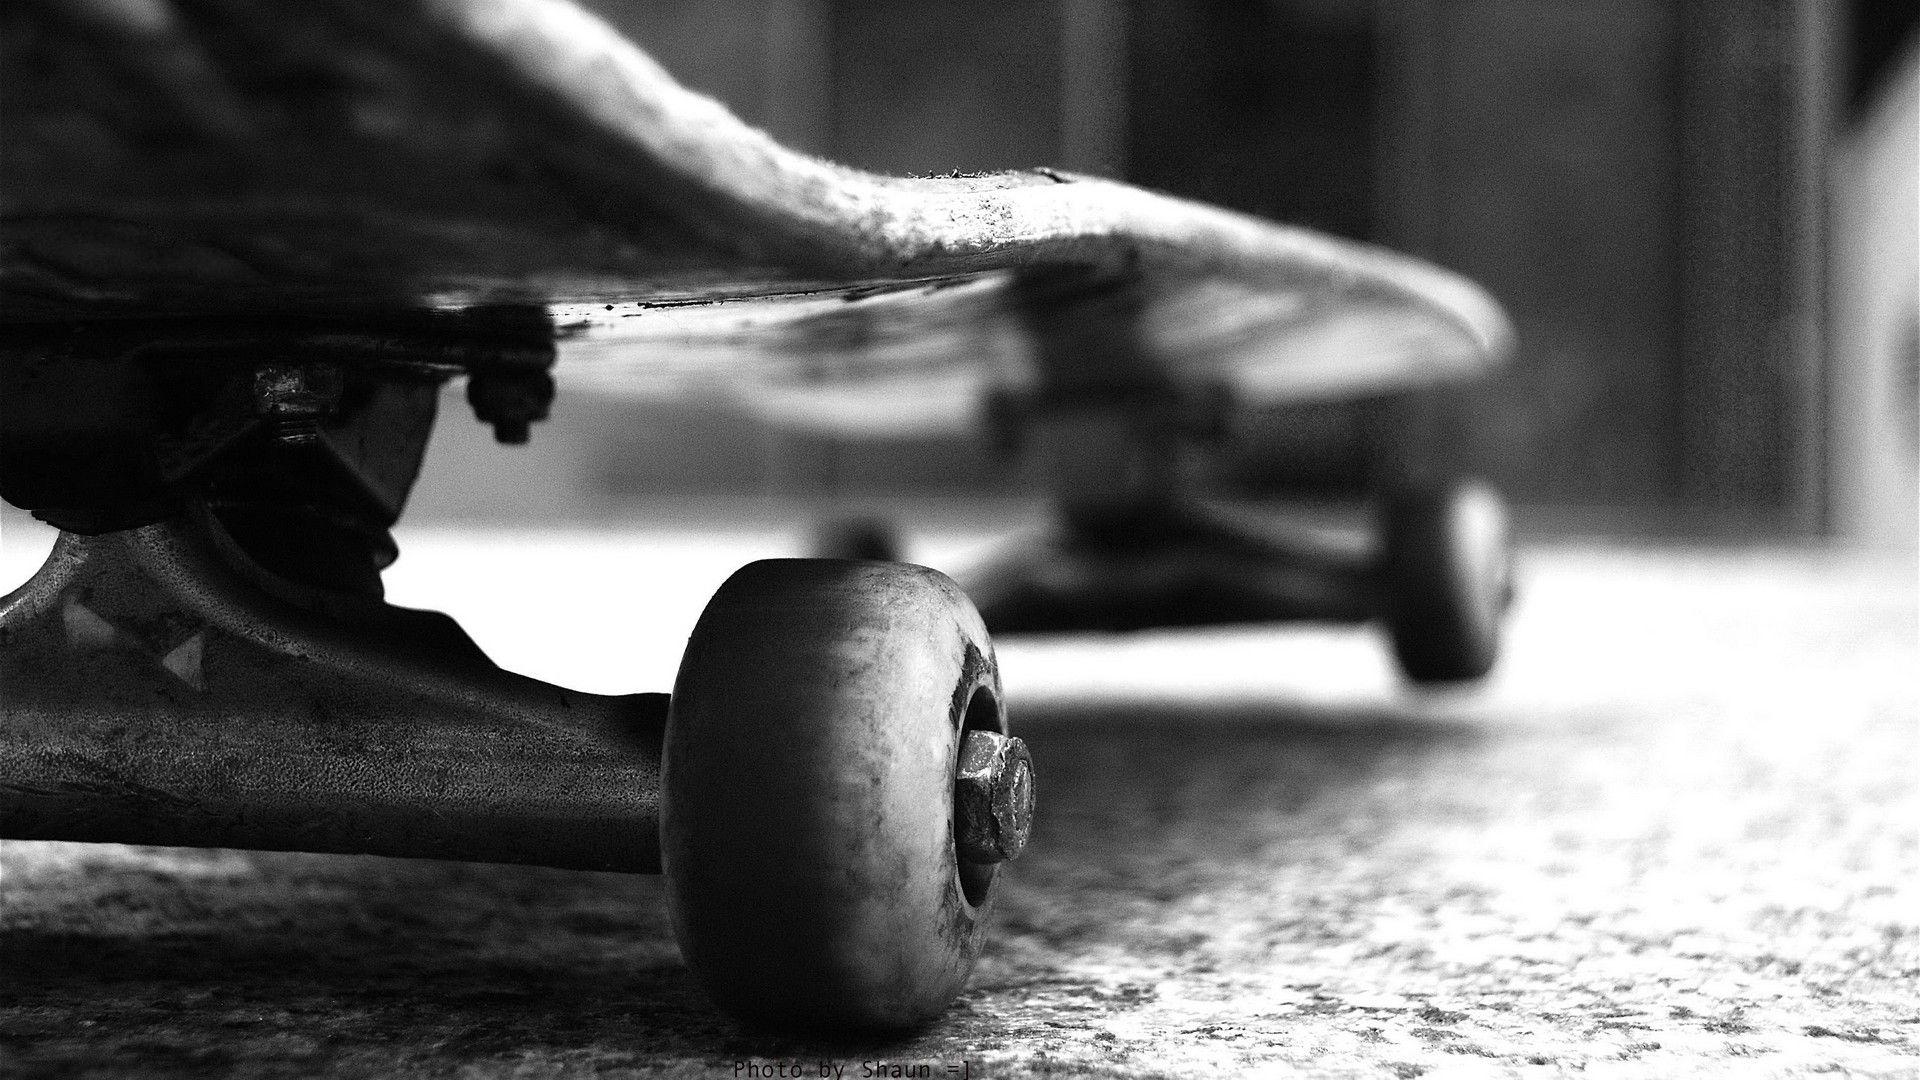 Skateboarding Image and Wallpaper for Mac, PC